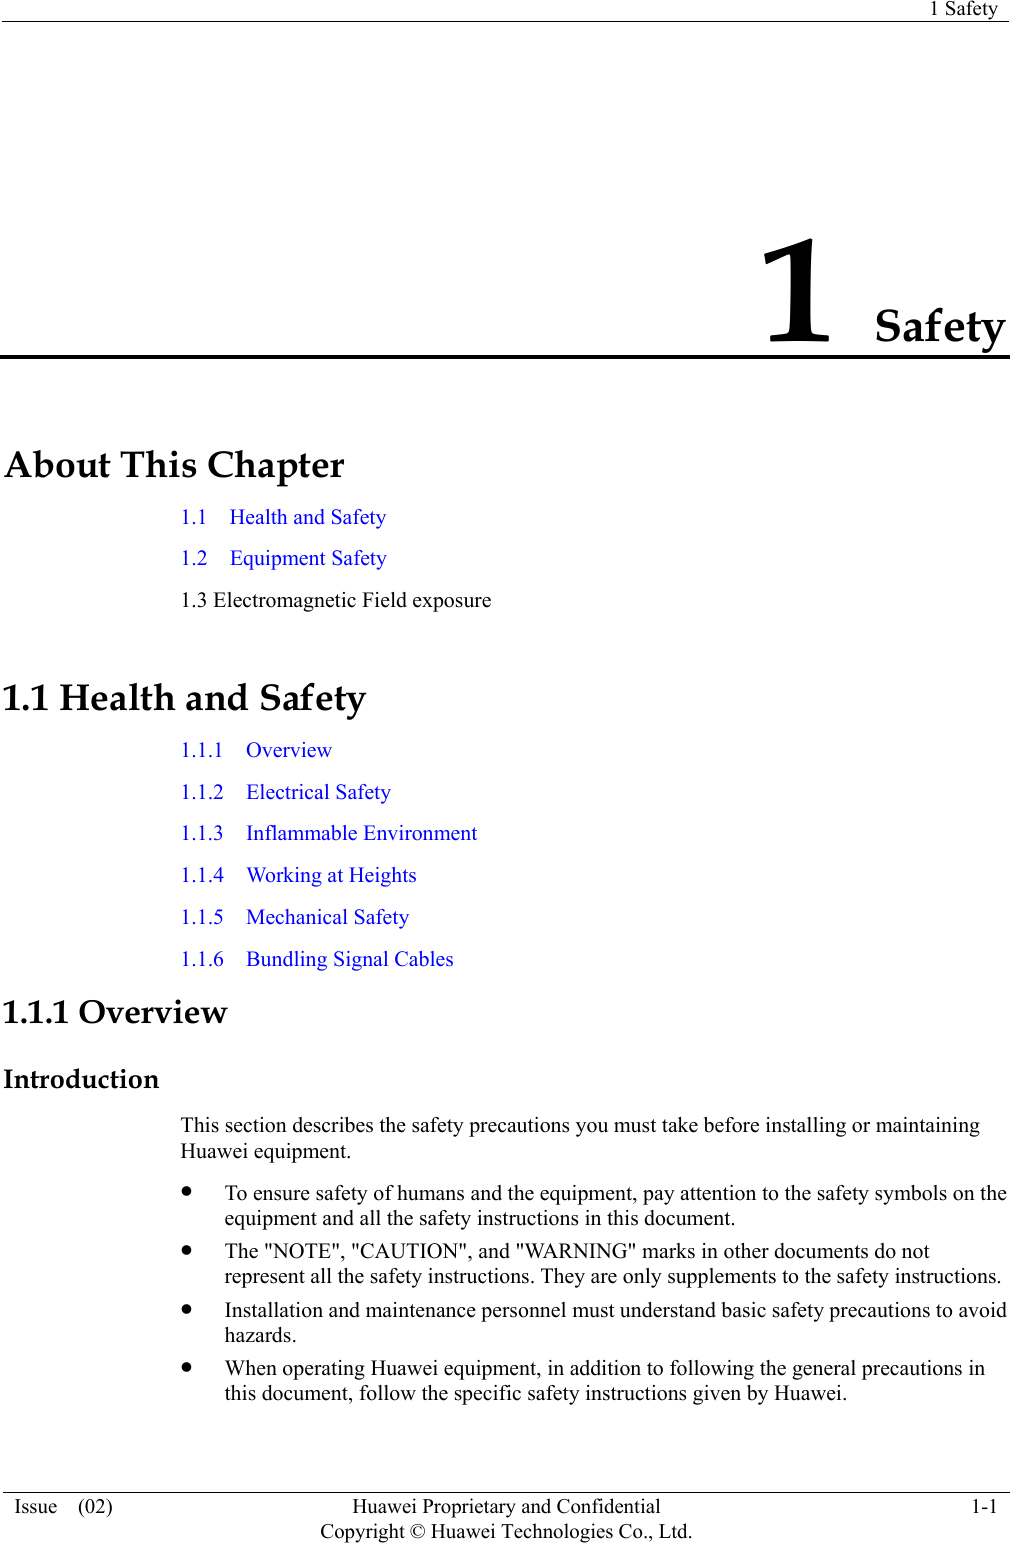   1 Safety Issue  (02)  Huawei Proprietary and Confidential     Copyright © Huawei Technologies Co., Ltd.1-1 1 Safety About This Chapter 1.1  Health and Safety 1.2  Equipment Safety 1.3 Electromagnetic Field exposure 1.1 Health and Safety 1.1.1  Overview 1.1.2  Electrical Safety 1.1.3  Inflammable Environment 1.1.4  Working at Heights 1.1.5  Mechanical Safety 1.1.6  Bundling Signal Cables 1.1.1 Overview Introduction This section describes the safety precautions you must take before installing or maintaining Huawei equipment. z To ensure safety of humans and the equipment, pay attention to the safety symbols on the equipment and all the safety instructions in this document. z The &quot;NOTE&quot;, &quot;CAUTION&quot;, and &quot;WARNING&quot; marks in other documents do not represent all the safety instructions. They are only supplements to the safety instructions. z Installation and maintenance personnel must understand basic safety precautions to avoid hazards. z When operating Huawei equipment, in addition to following the general precautions in this document, follow the specific safety instructions given by Huawei. 